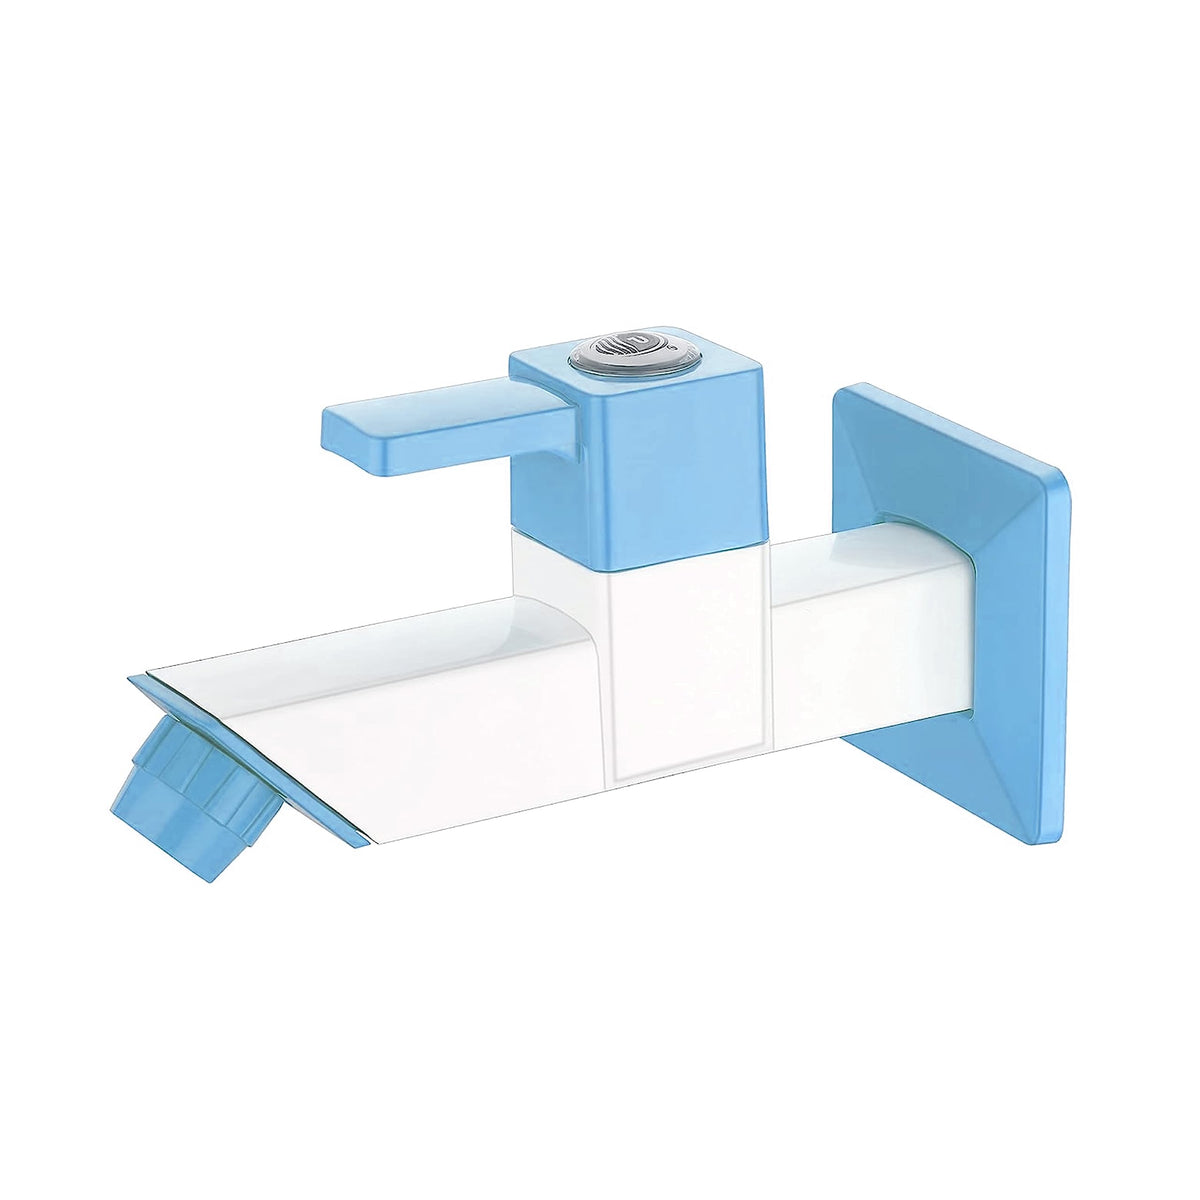 Primax PTMT Single Lever Bib Cock (Long Body) for Bathroom/Kitchen Sink Tap/Basin Faucet with Plastic Wall Flange - (Blue & White)